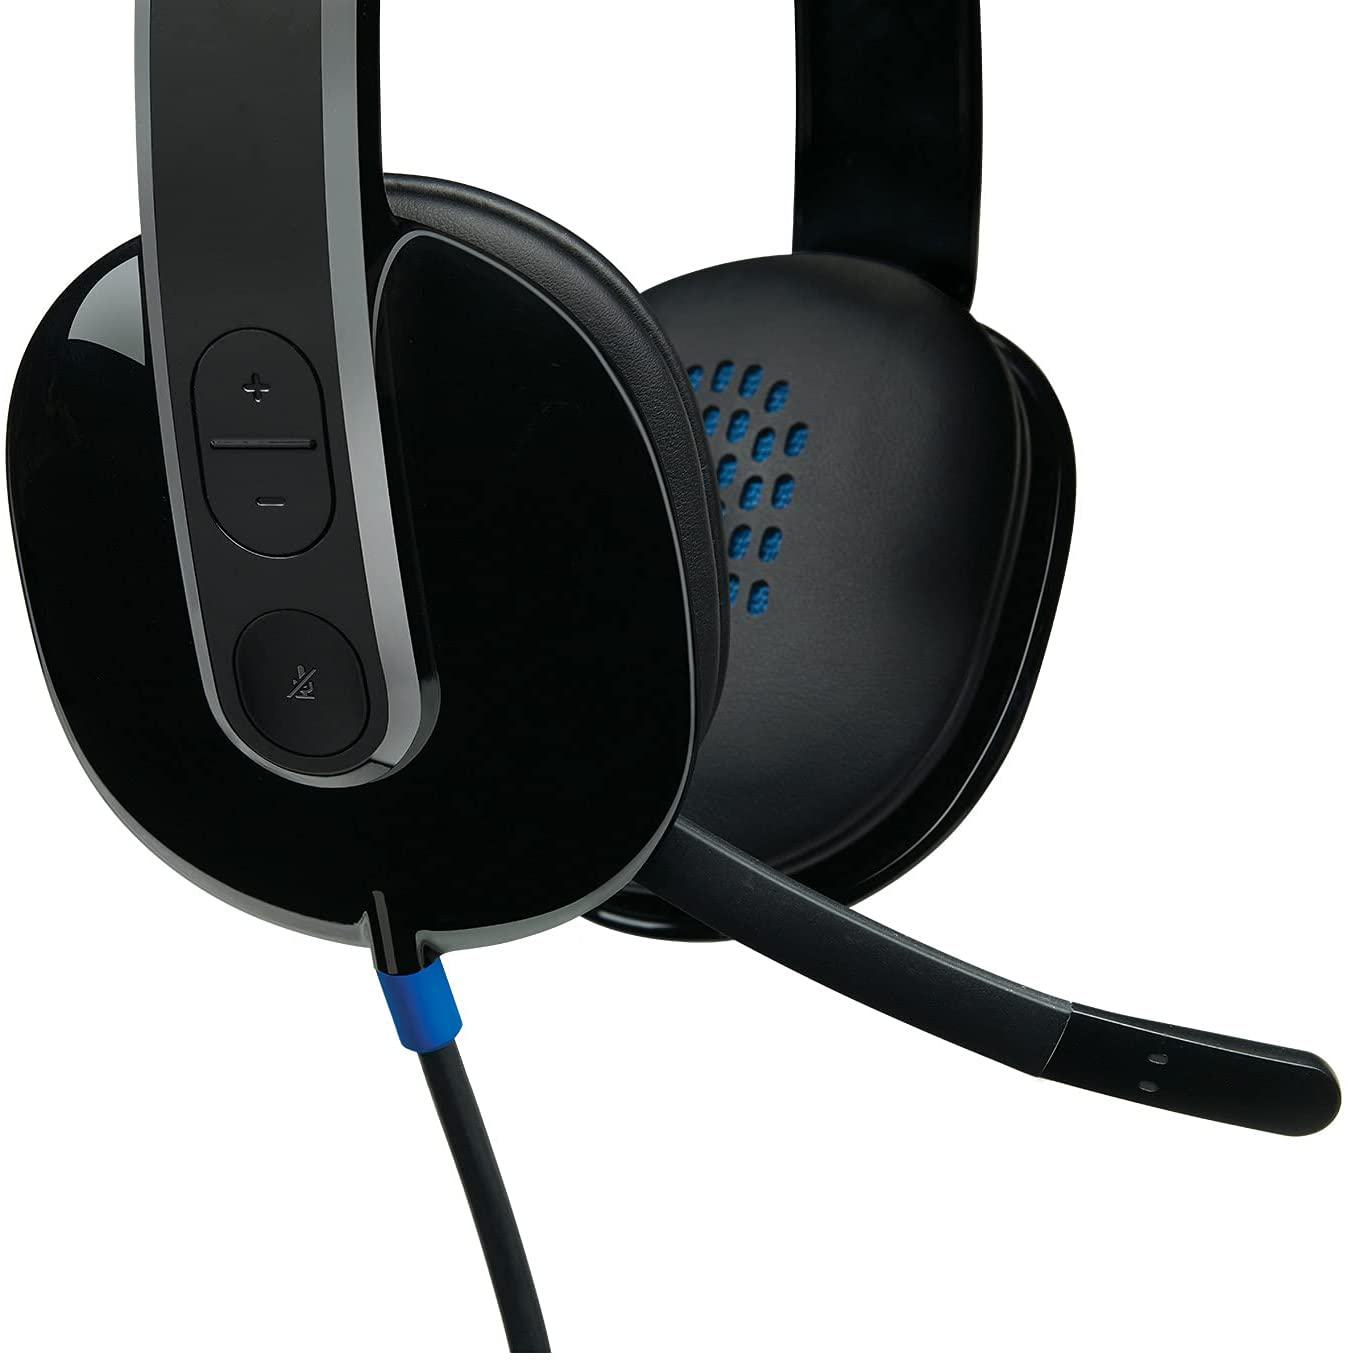 Logitech High-Performance USB Headset H540 for Windows and Mac, Skype Certified